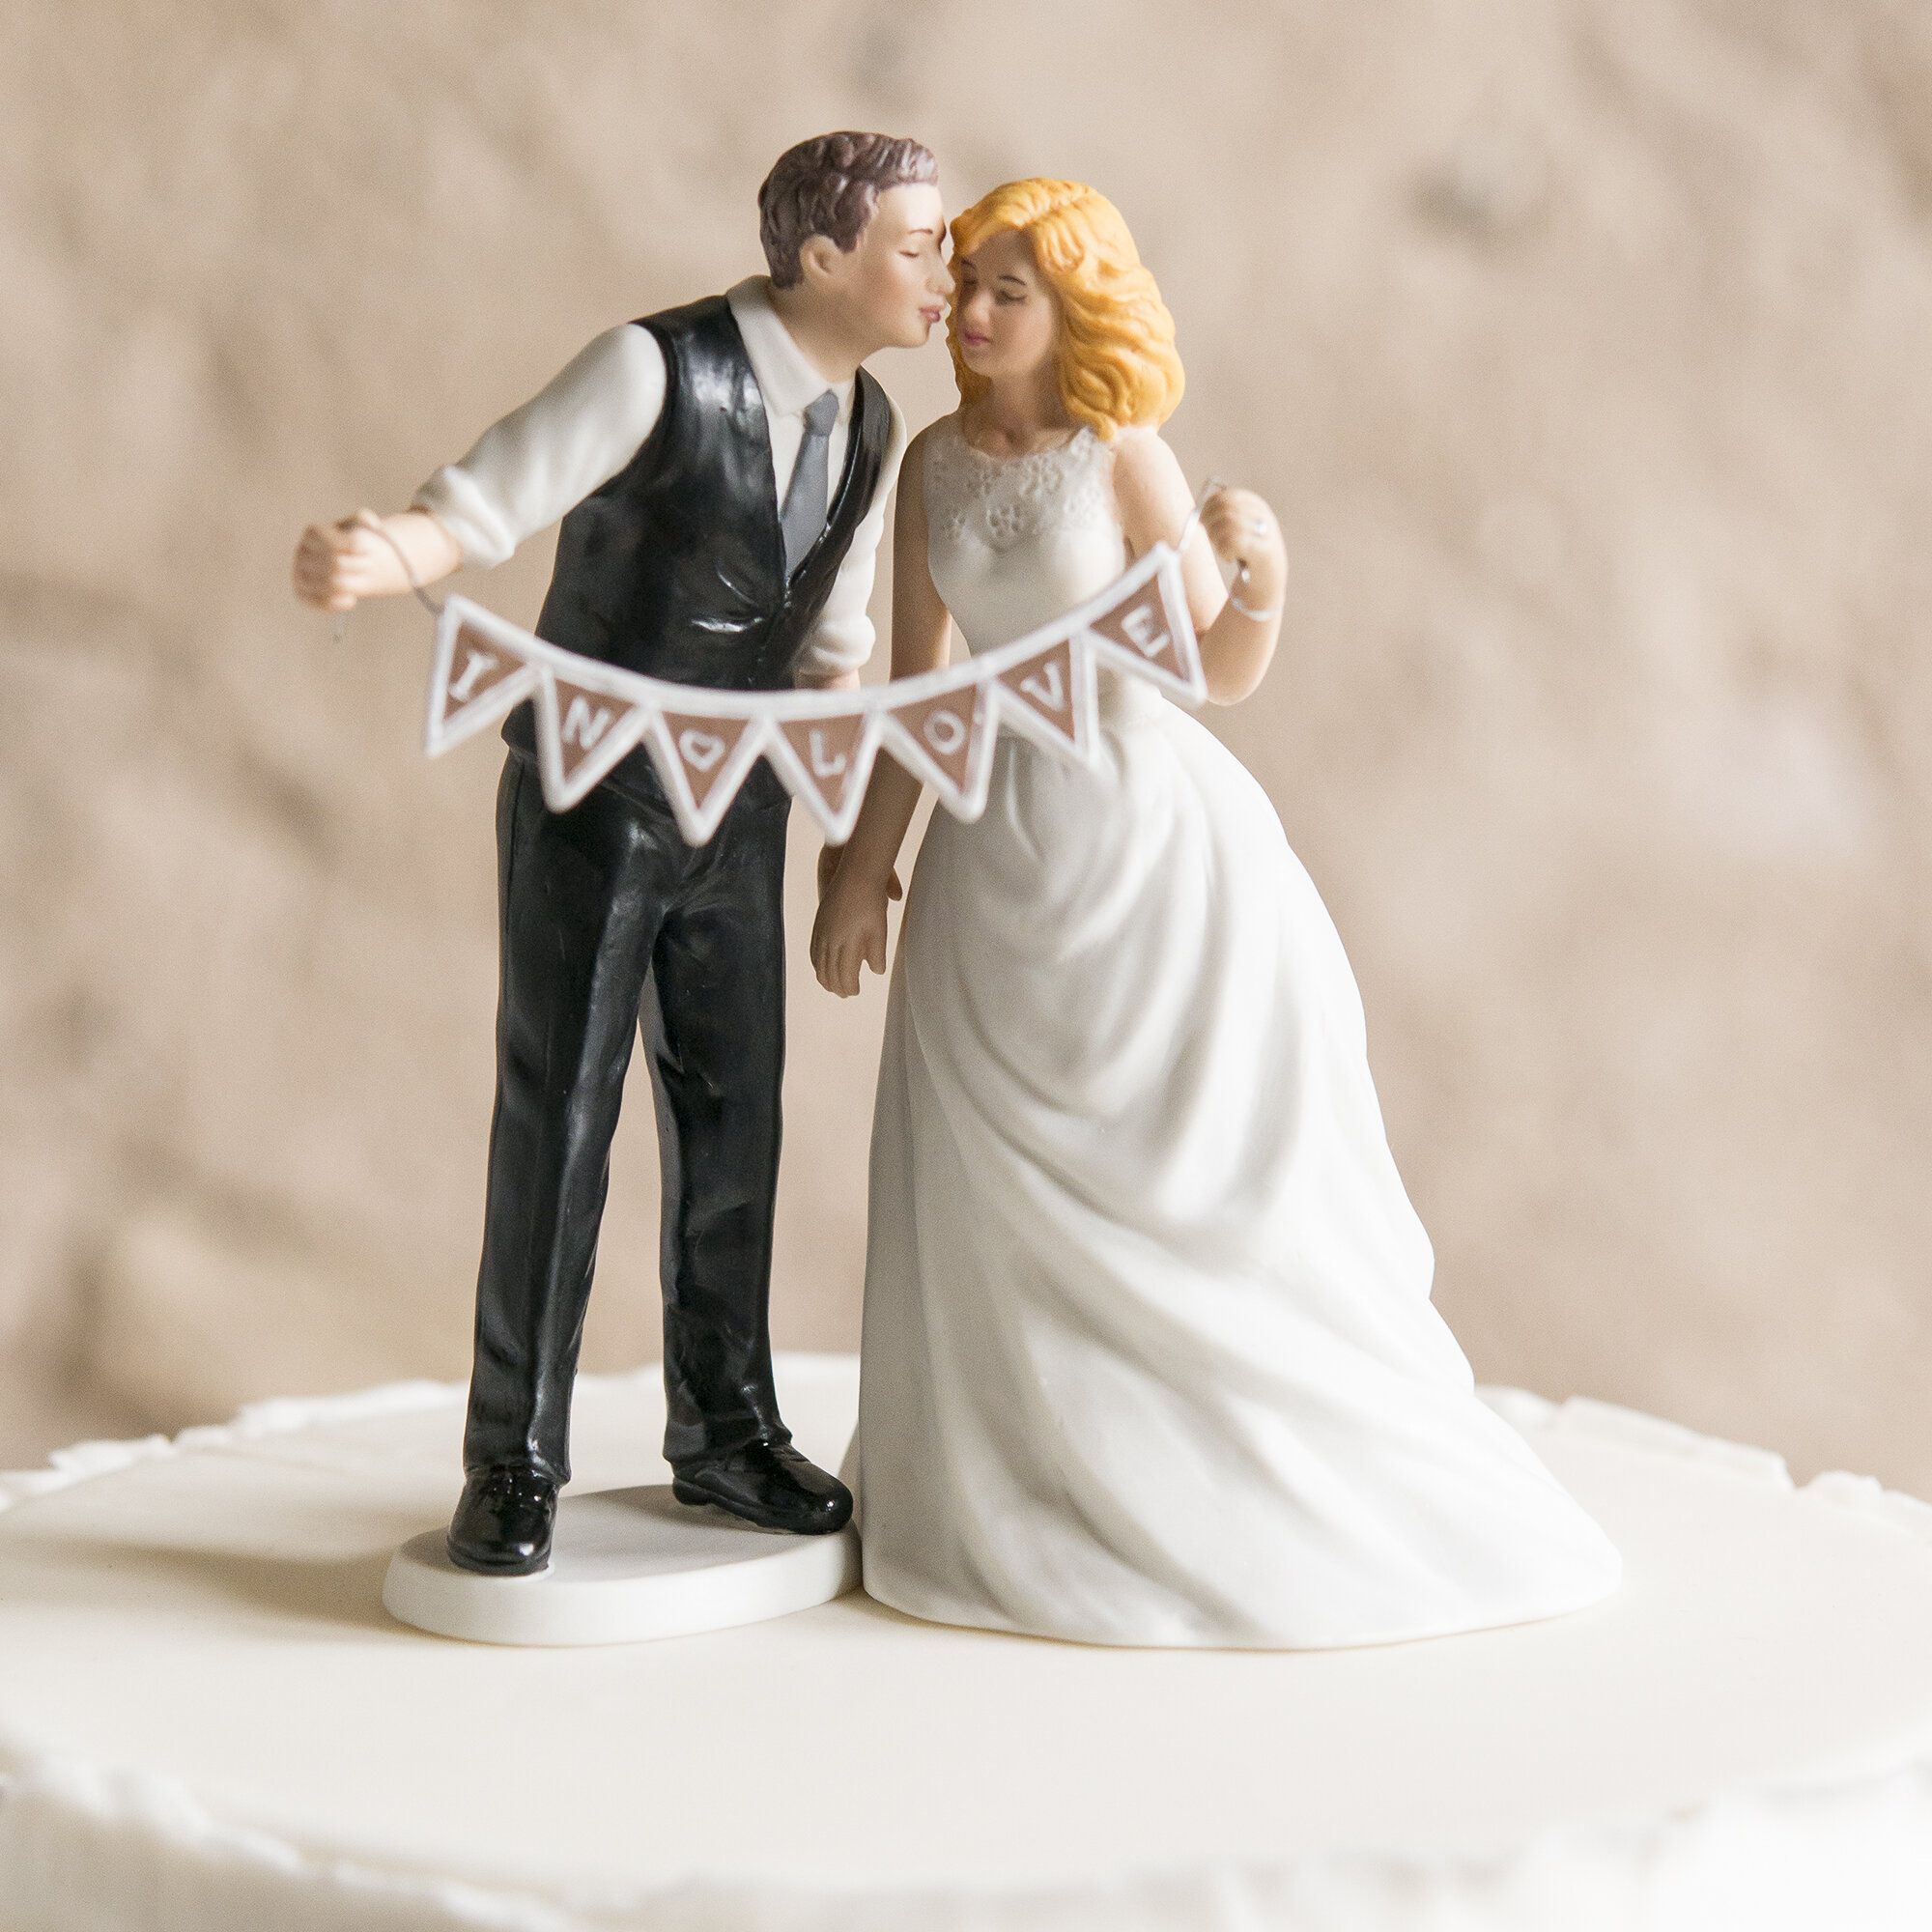 Kissing Bride and Groom Porcelain Cake Topper Wedding Cake Toppers.